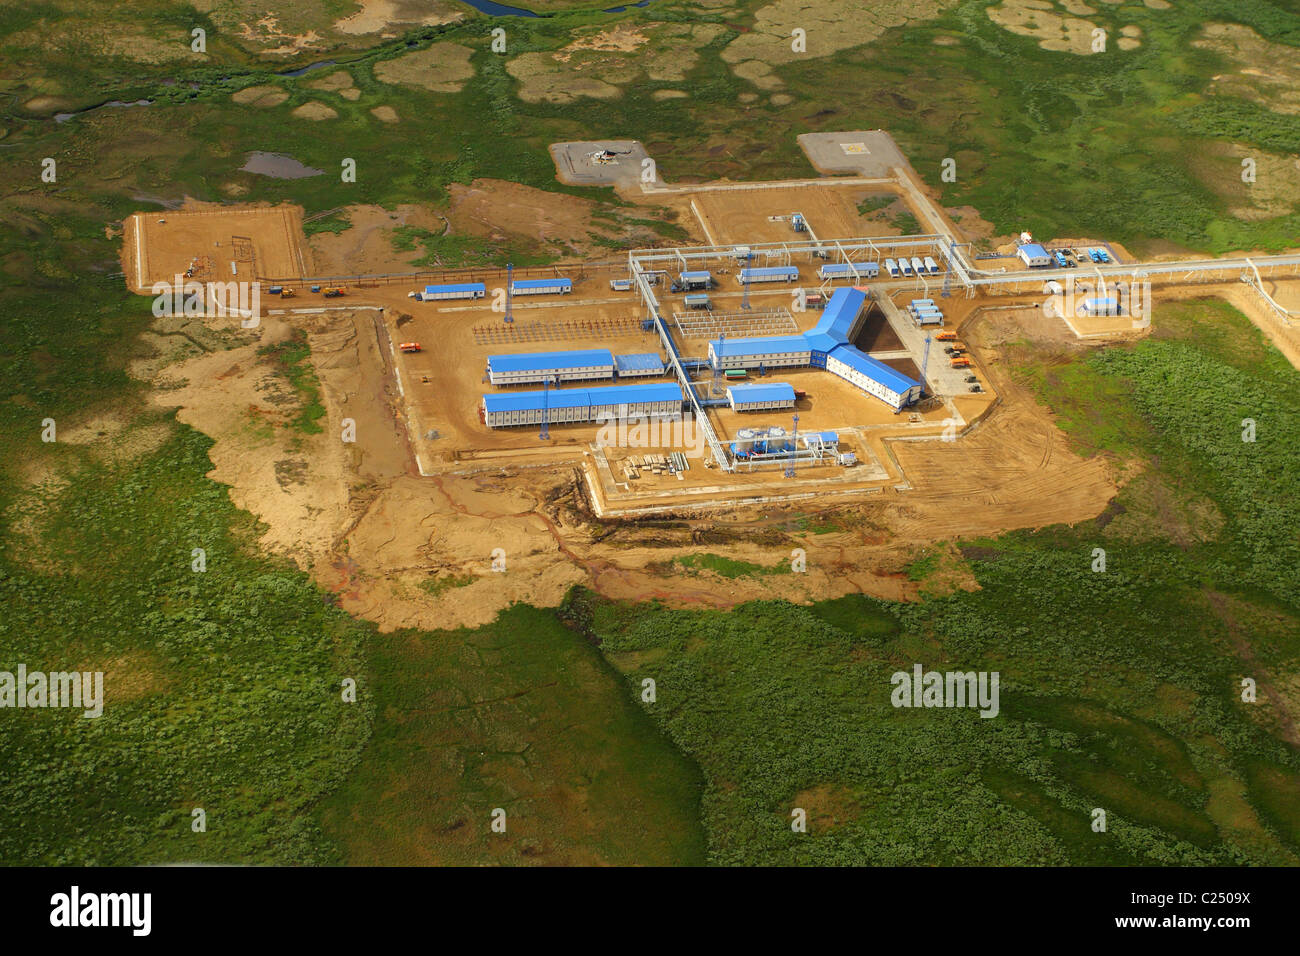 Workers' settlement in the tundra. One of the oil fields in Nenets Autonomous Okrug, RUSSIA, an aerial view in the summer. Stock Photo